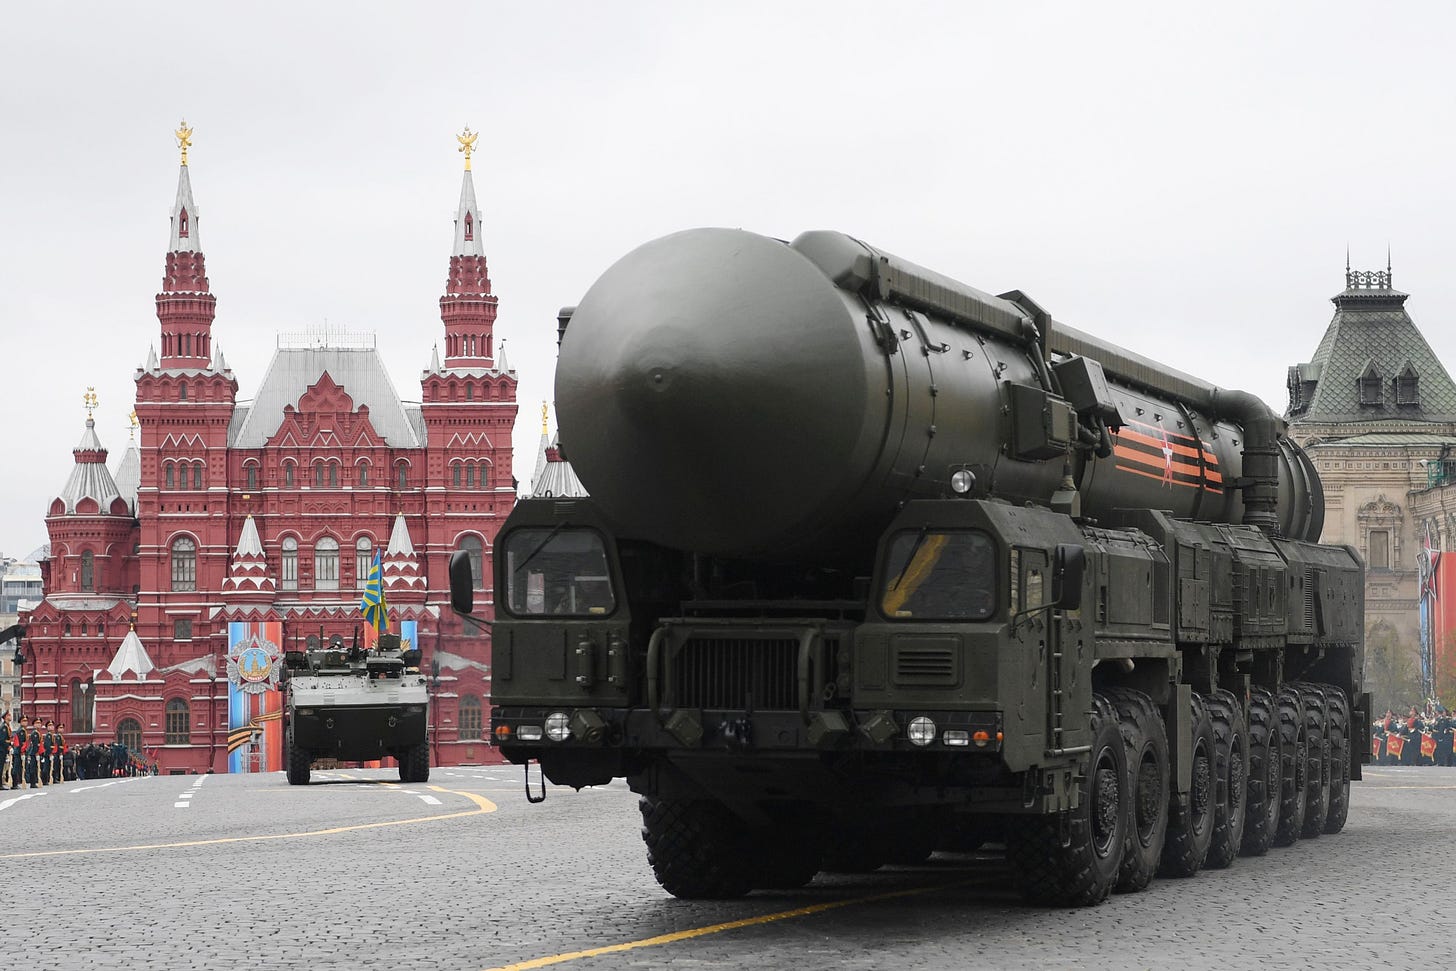 Russia's 'Invulnerable' Satan 2 Nuclear Missile Will Be Ready to Fire by  the End of 2020, Space Agency Official Says